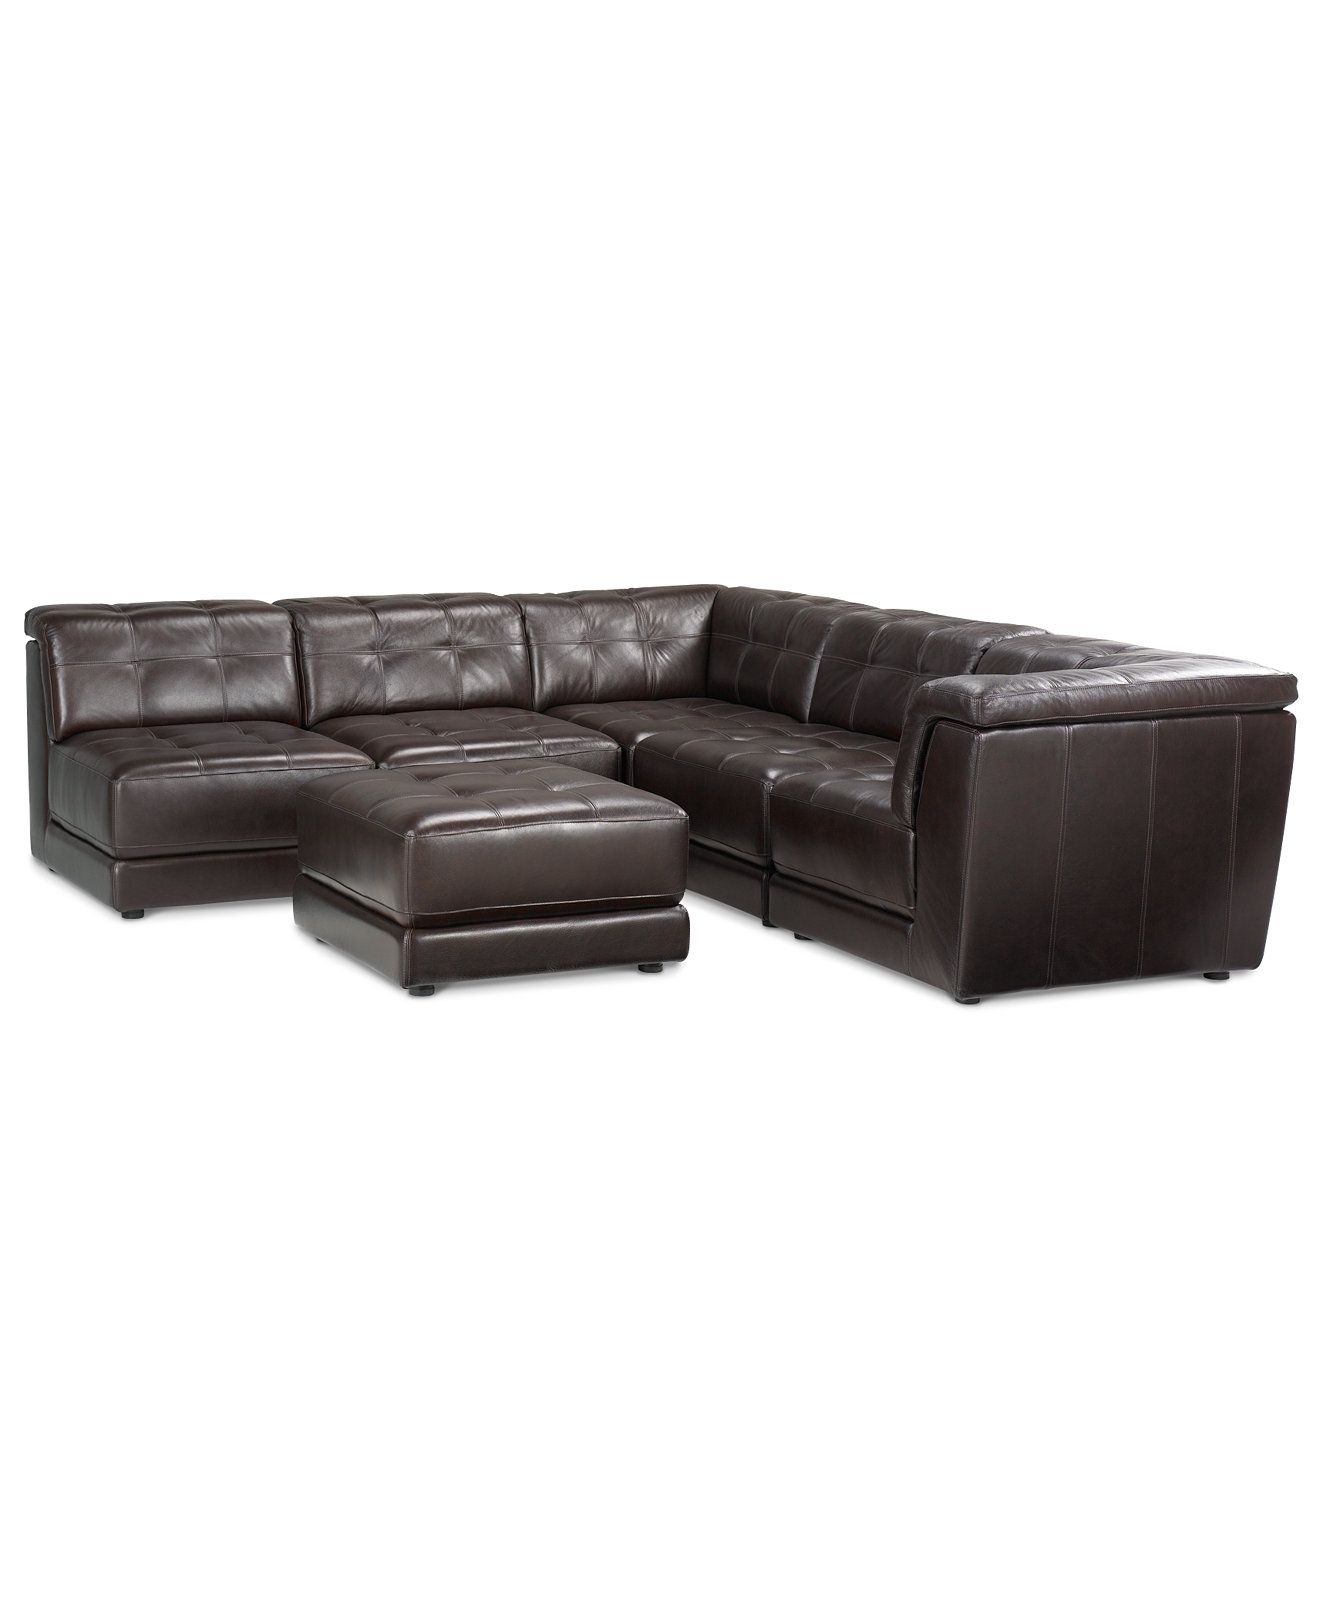 Stacey Leather 6 Piece Modular Sectional Sofa 3 Armless Chairs 2 Pertaining To 6 Piece Leather Sectional Sofa (View 8 of 15)